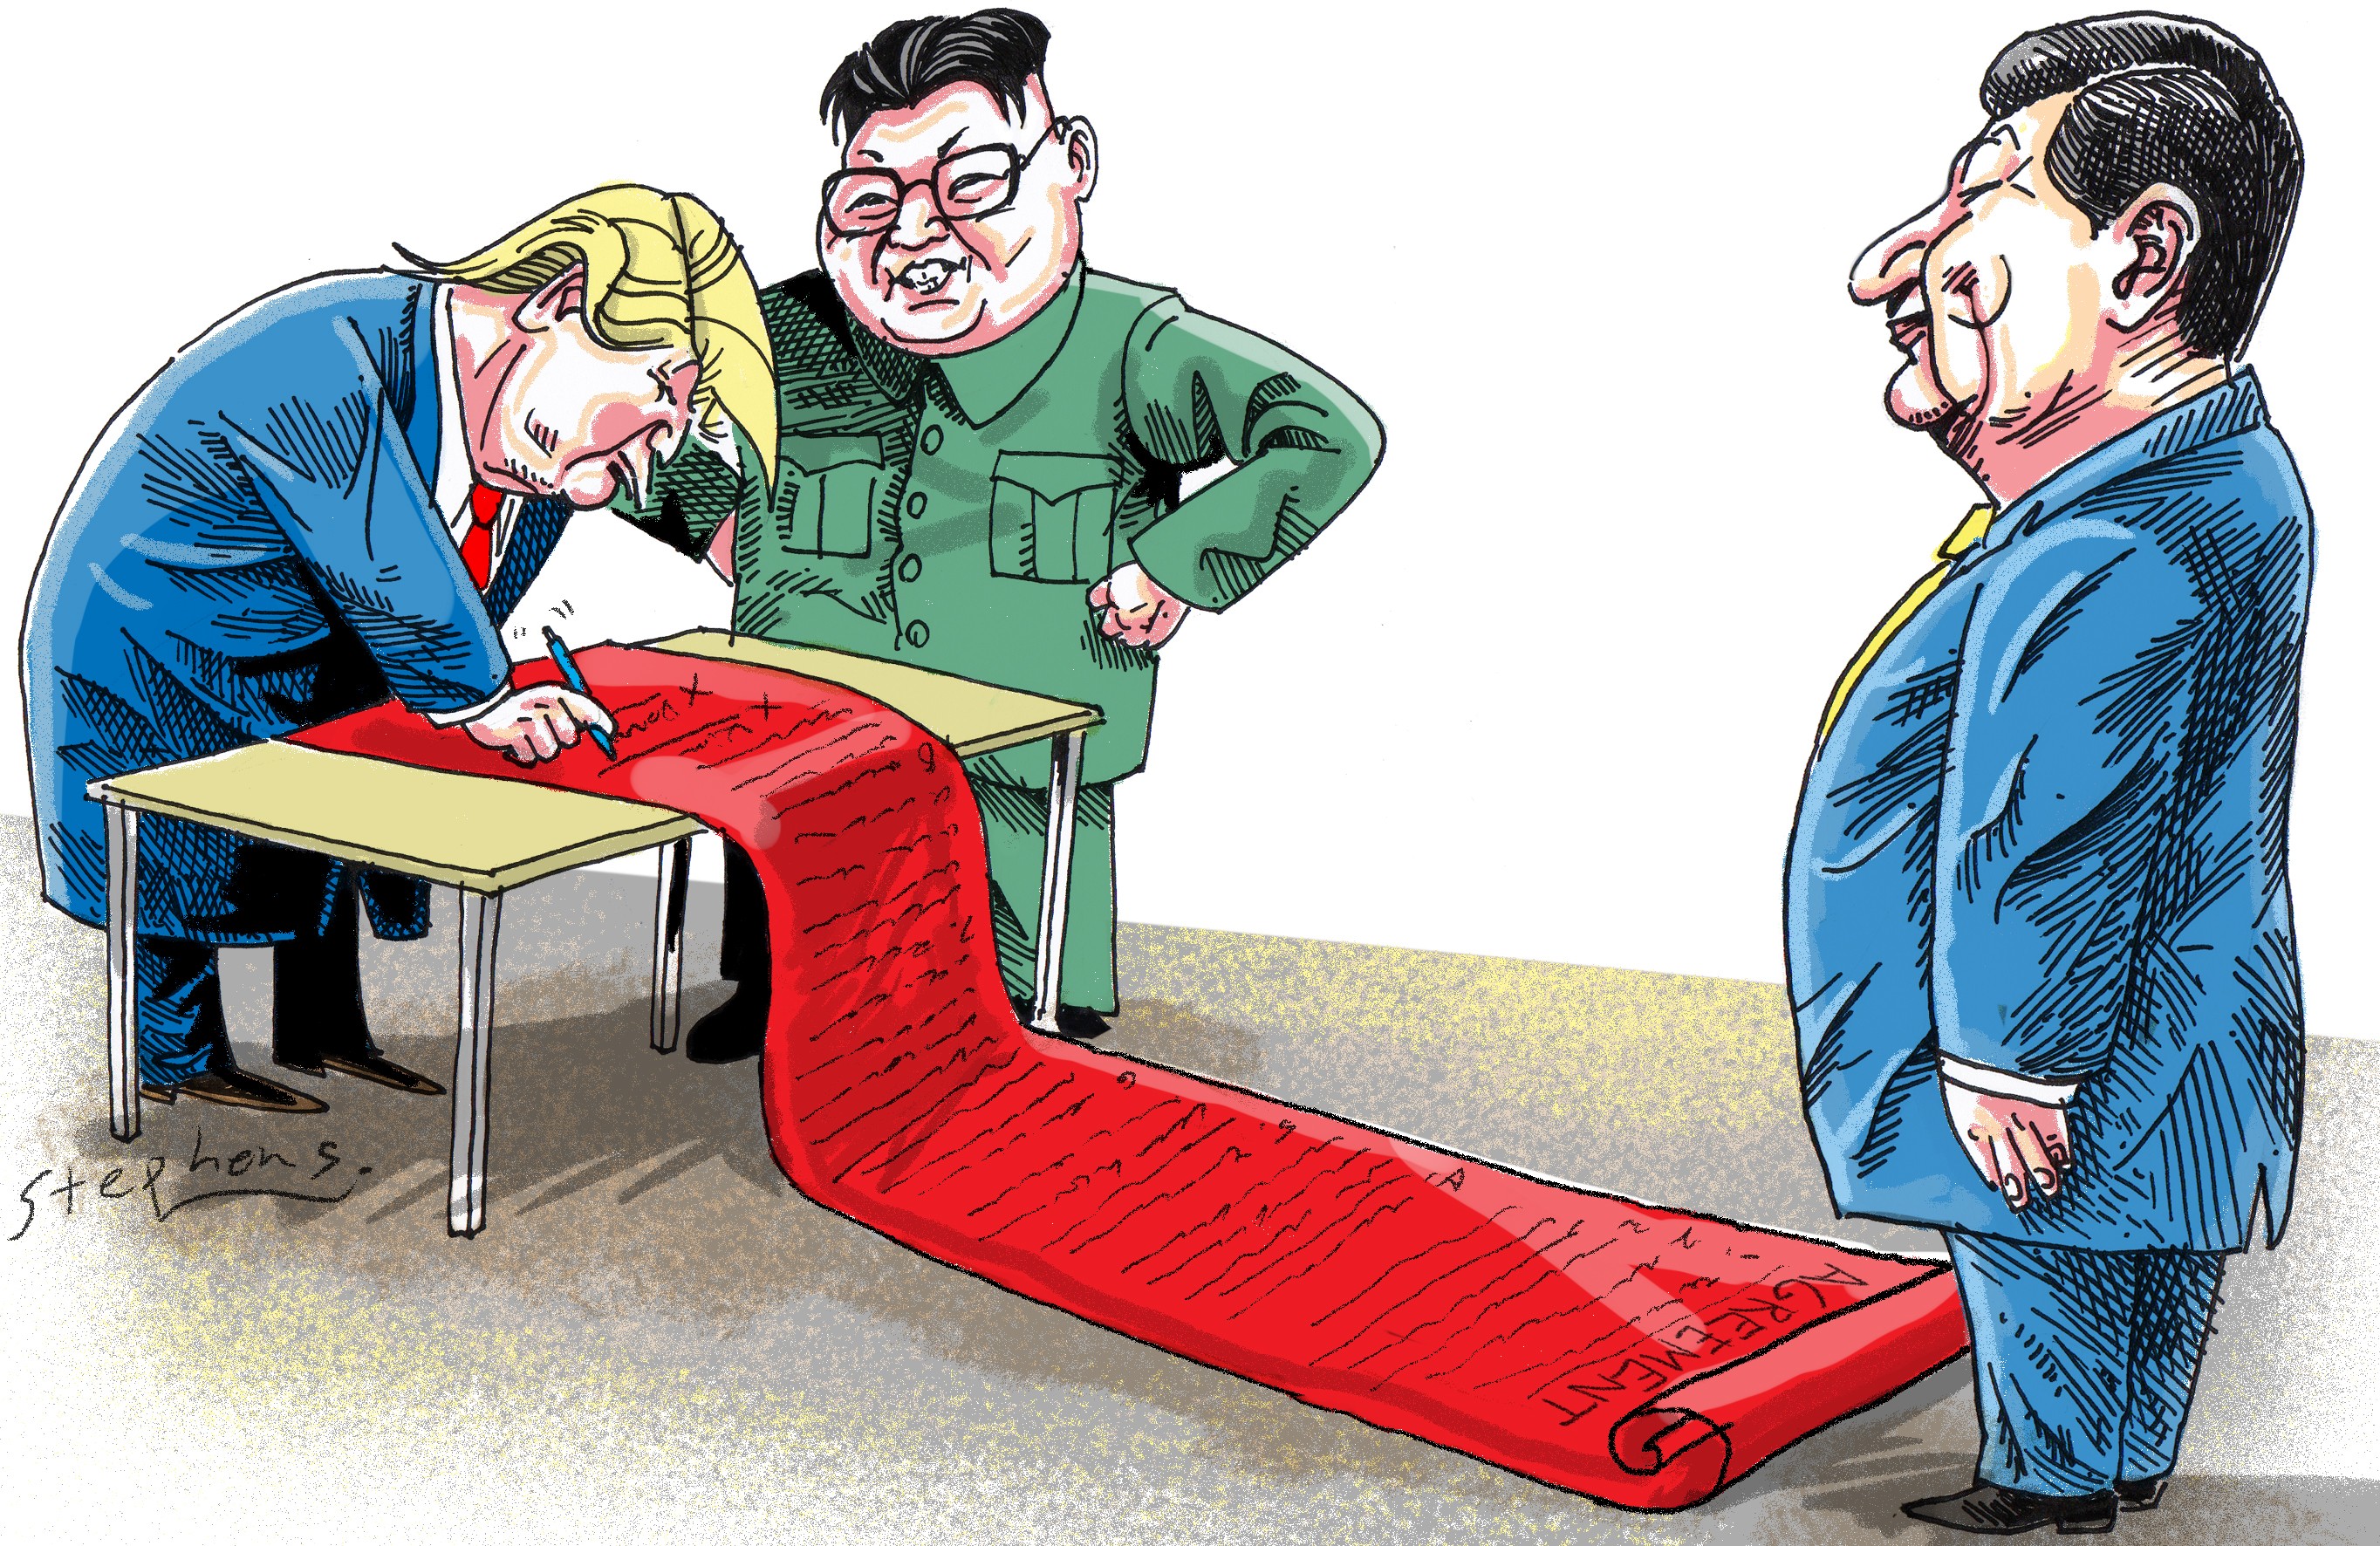 Trump, yielding to Kim at the summit, appeared totally unaware of the gift he was bestowing not just on the North Korean leader but on Xi, whom he praised as his “good friend”. Illustration: Craig Stephens